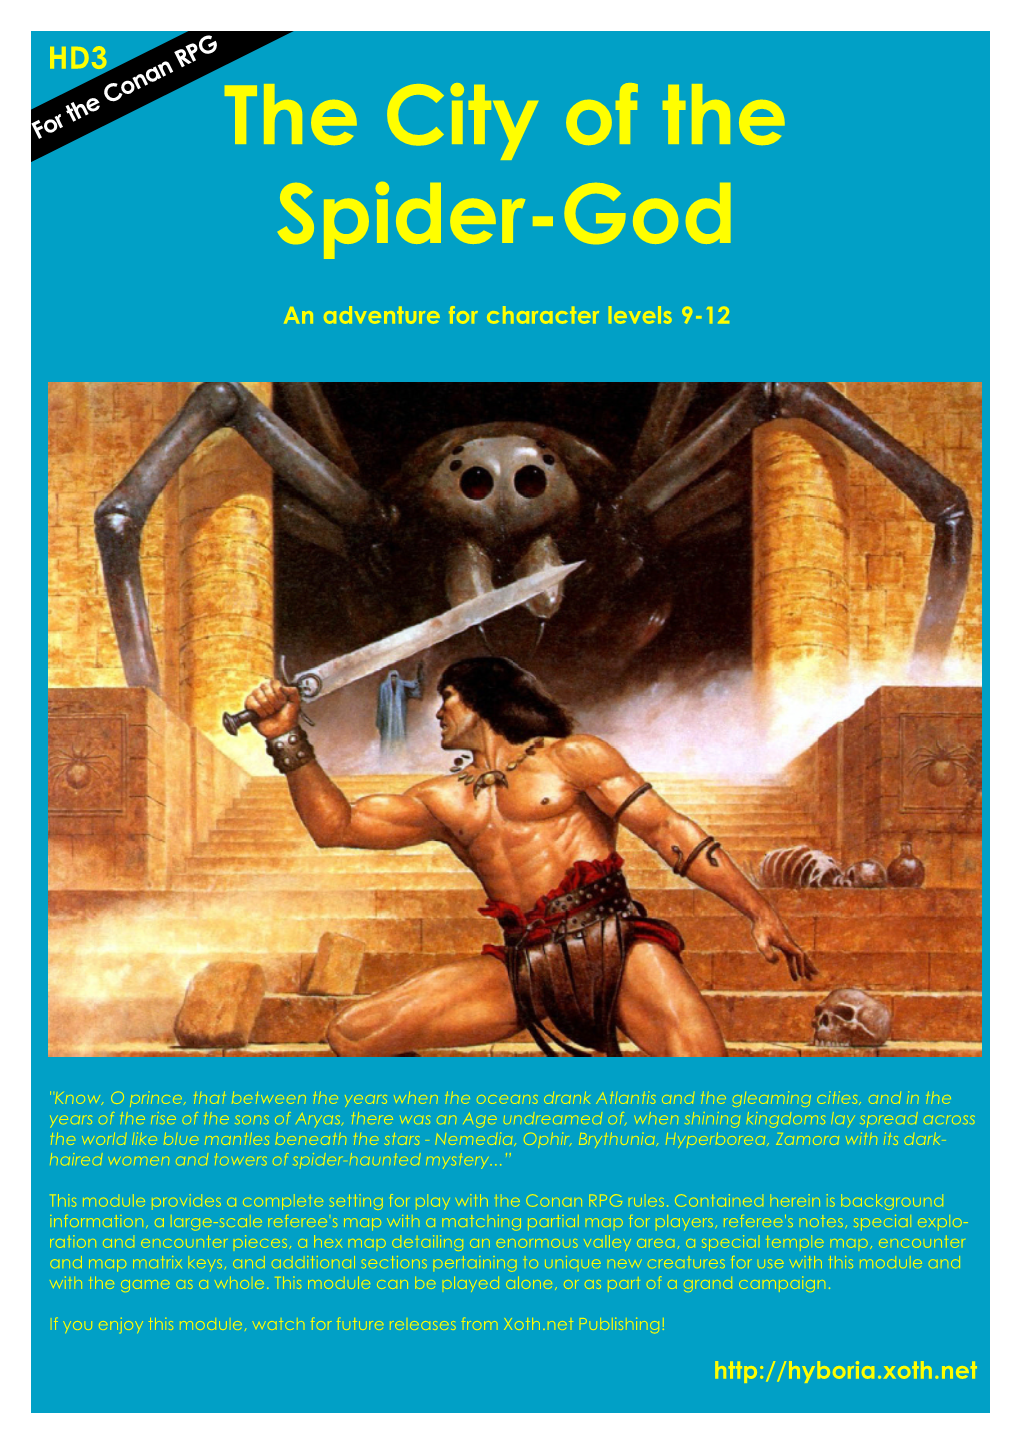 HD3 the City of the Spider-God